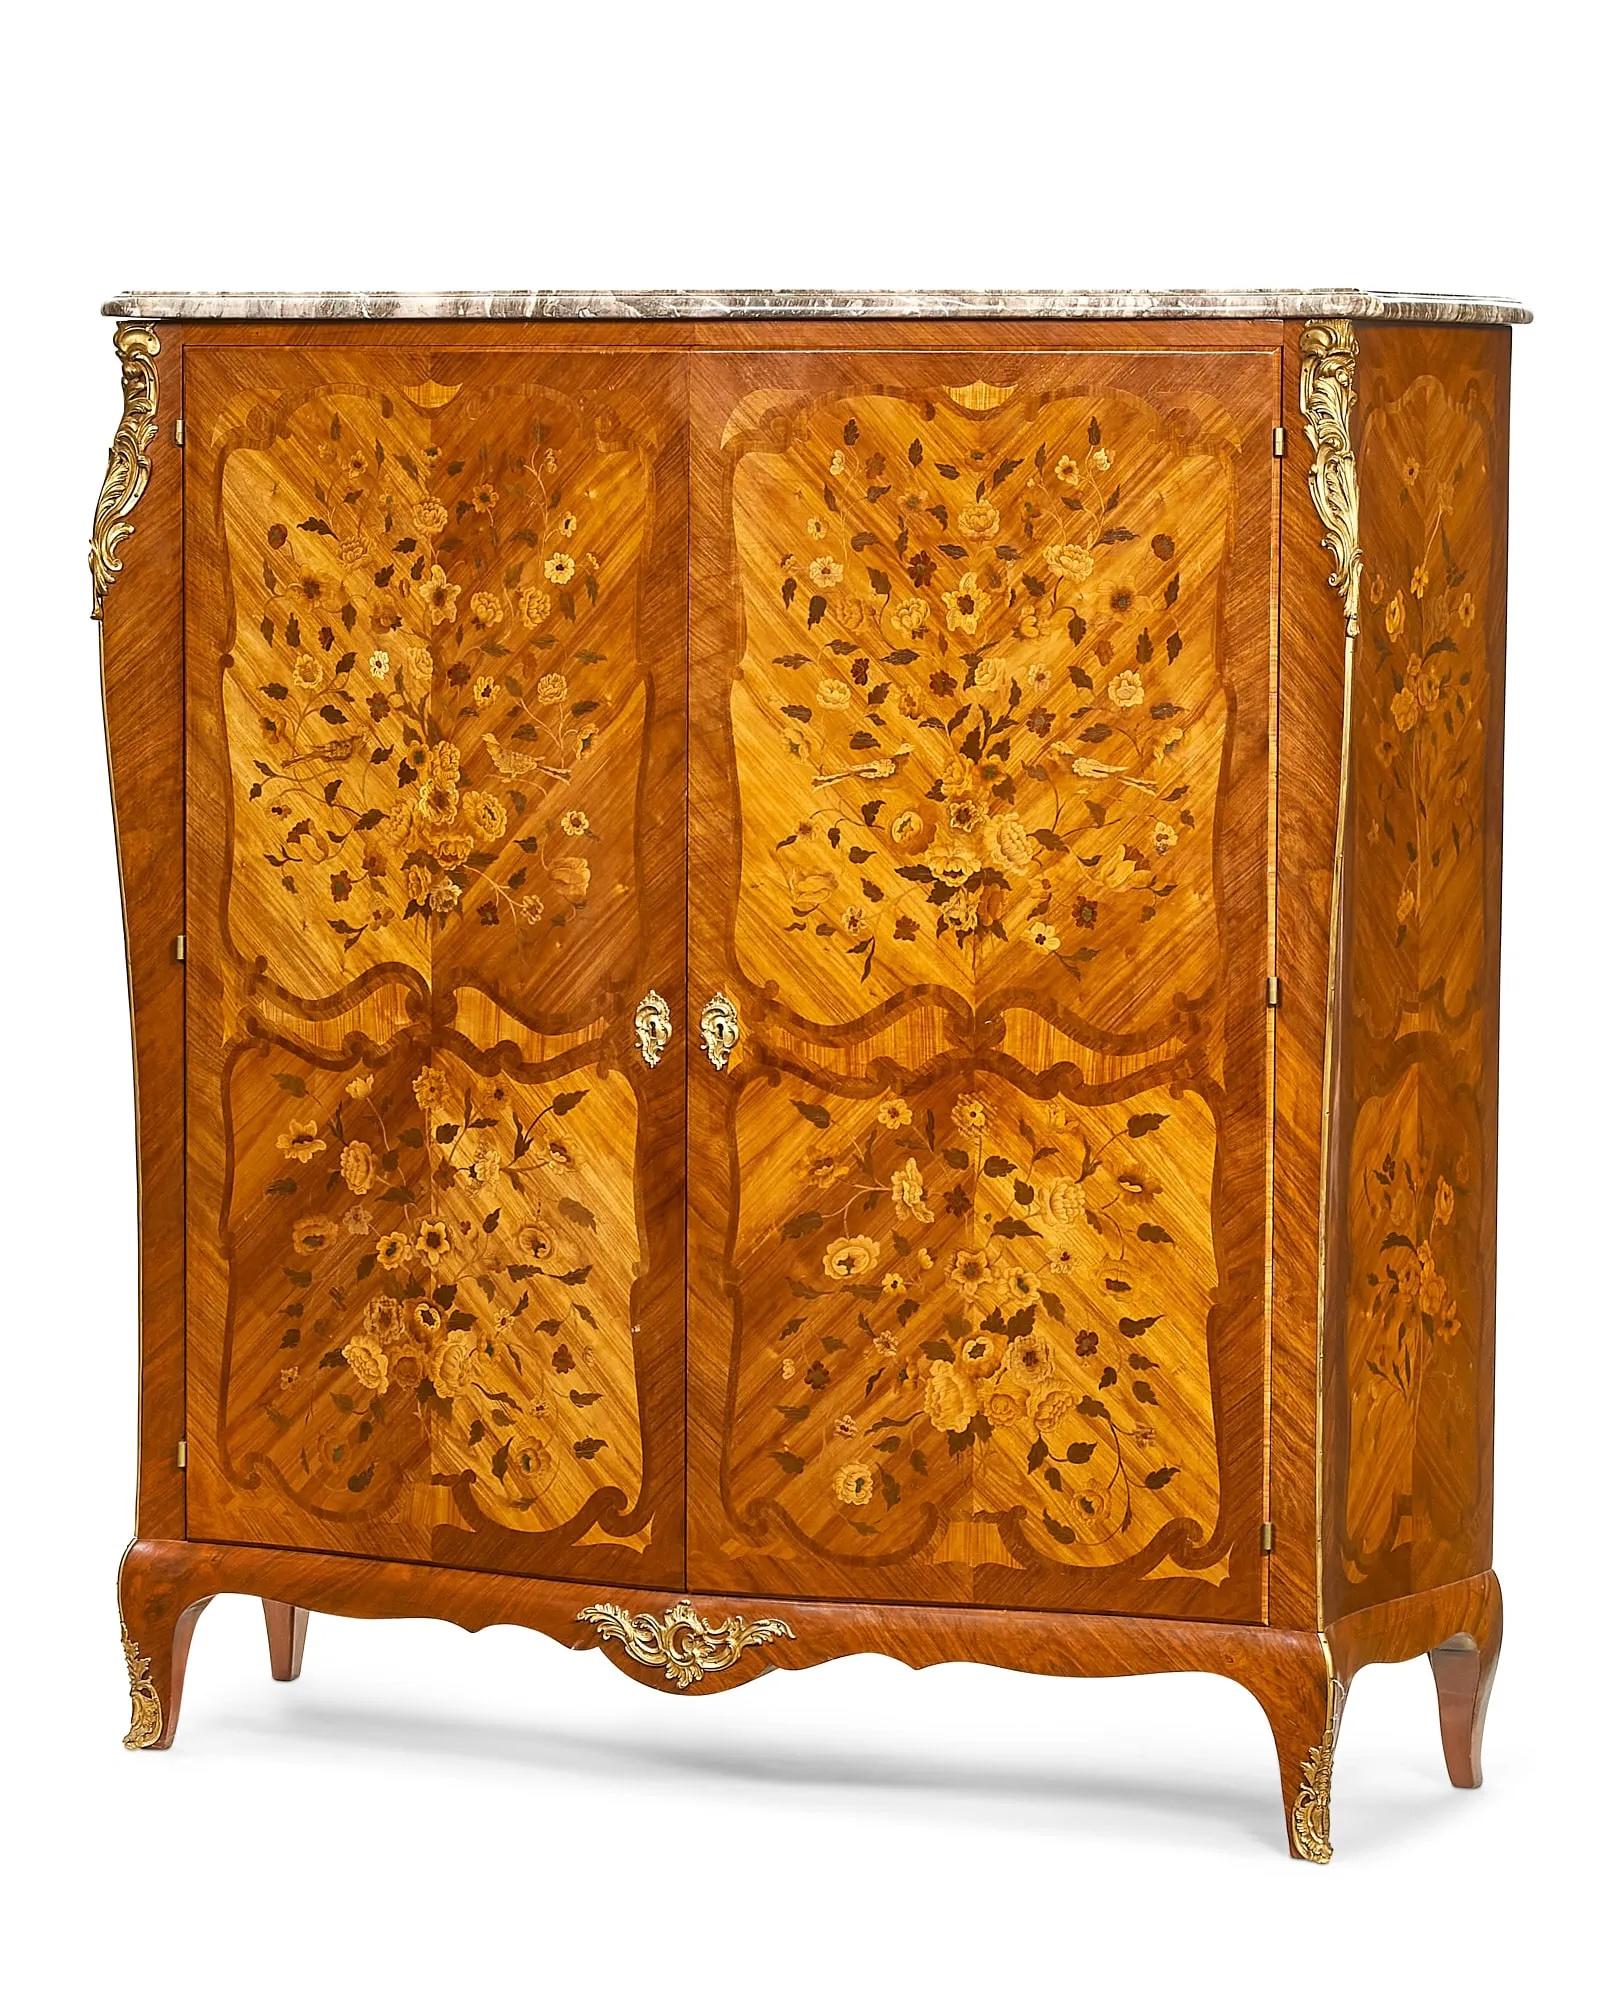 Hand-Crafted Antique French Louis XV Style Mixed Woods Marquetry Inlaid Armoire Circa 1890 For Sale